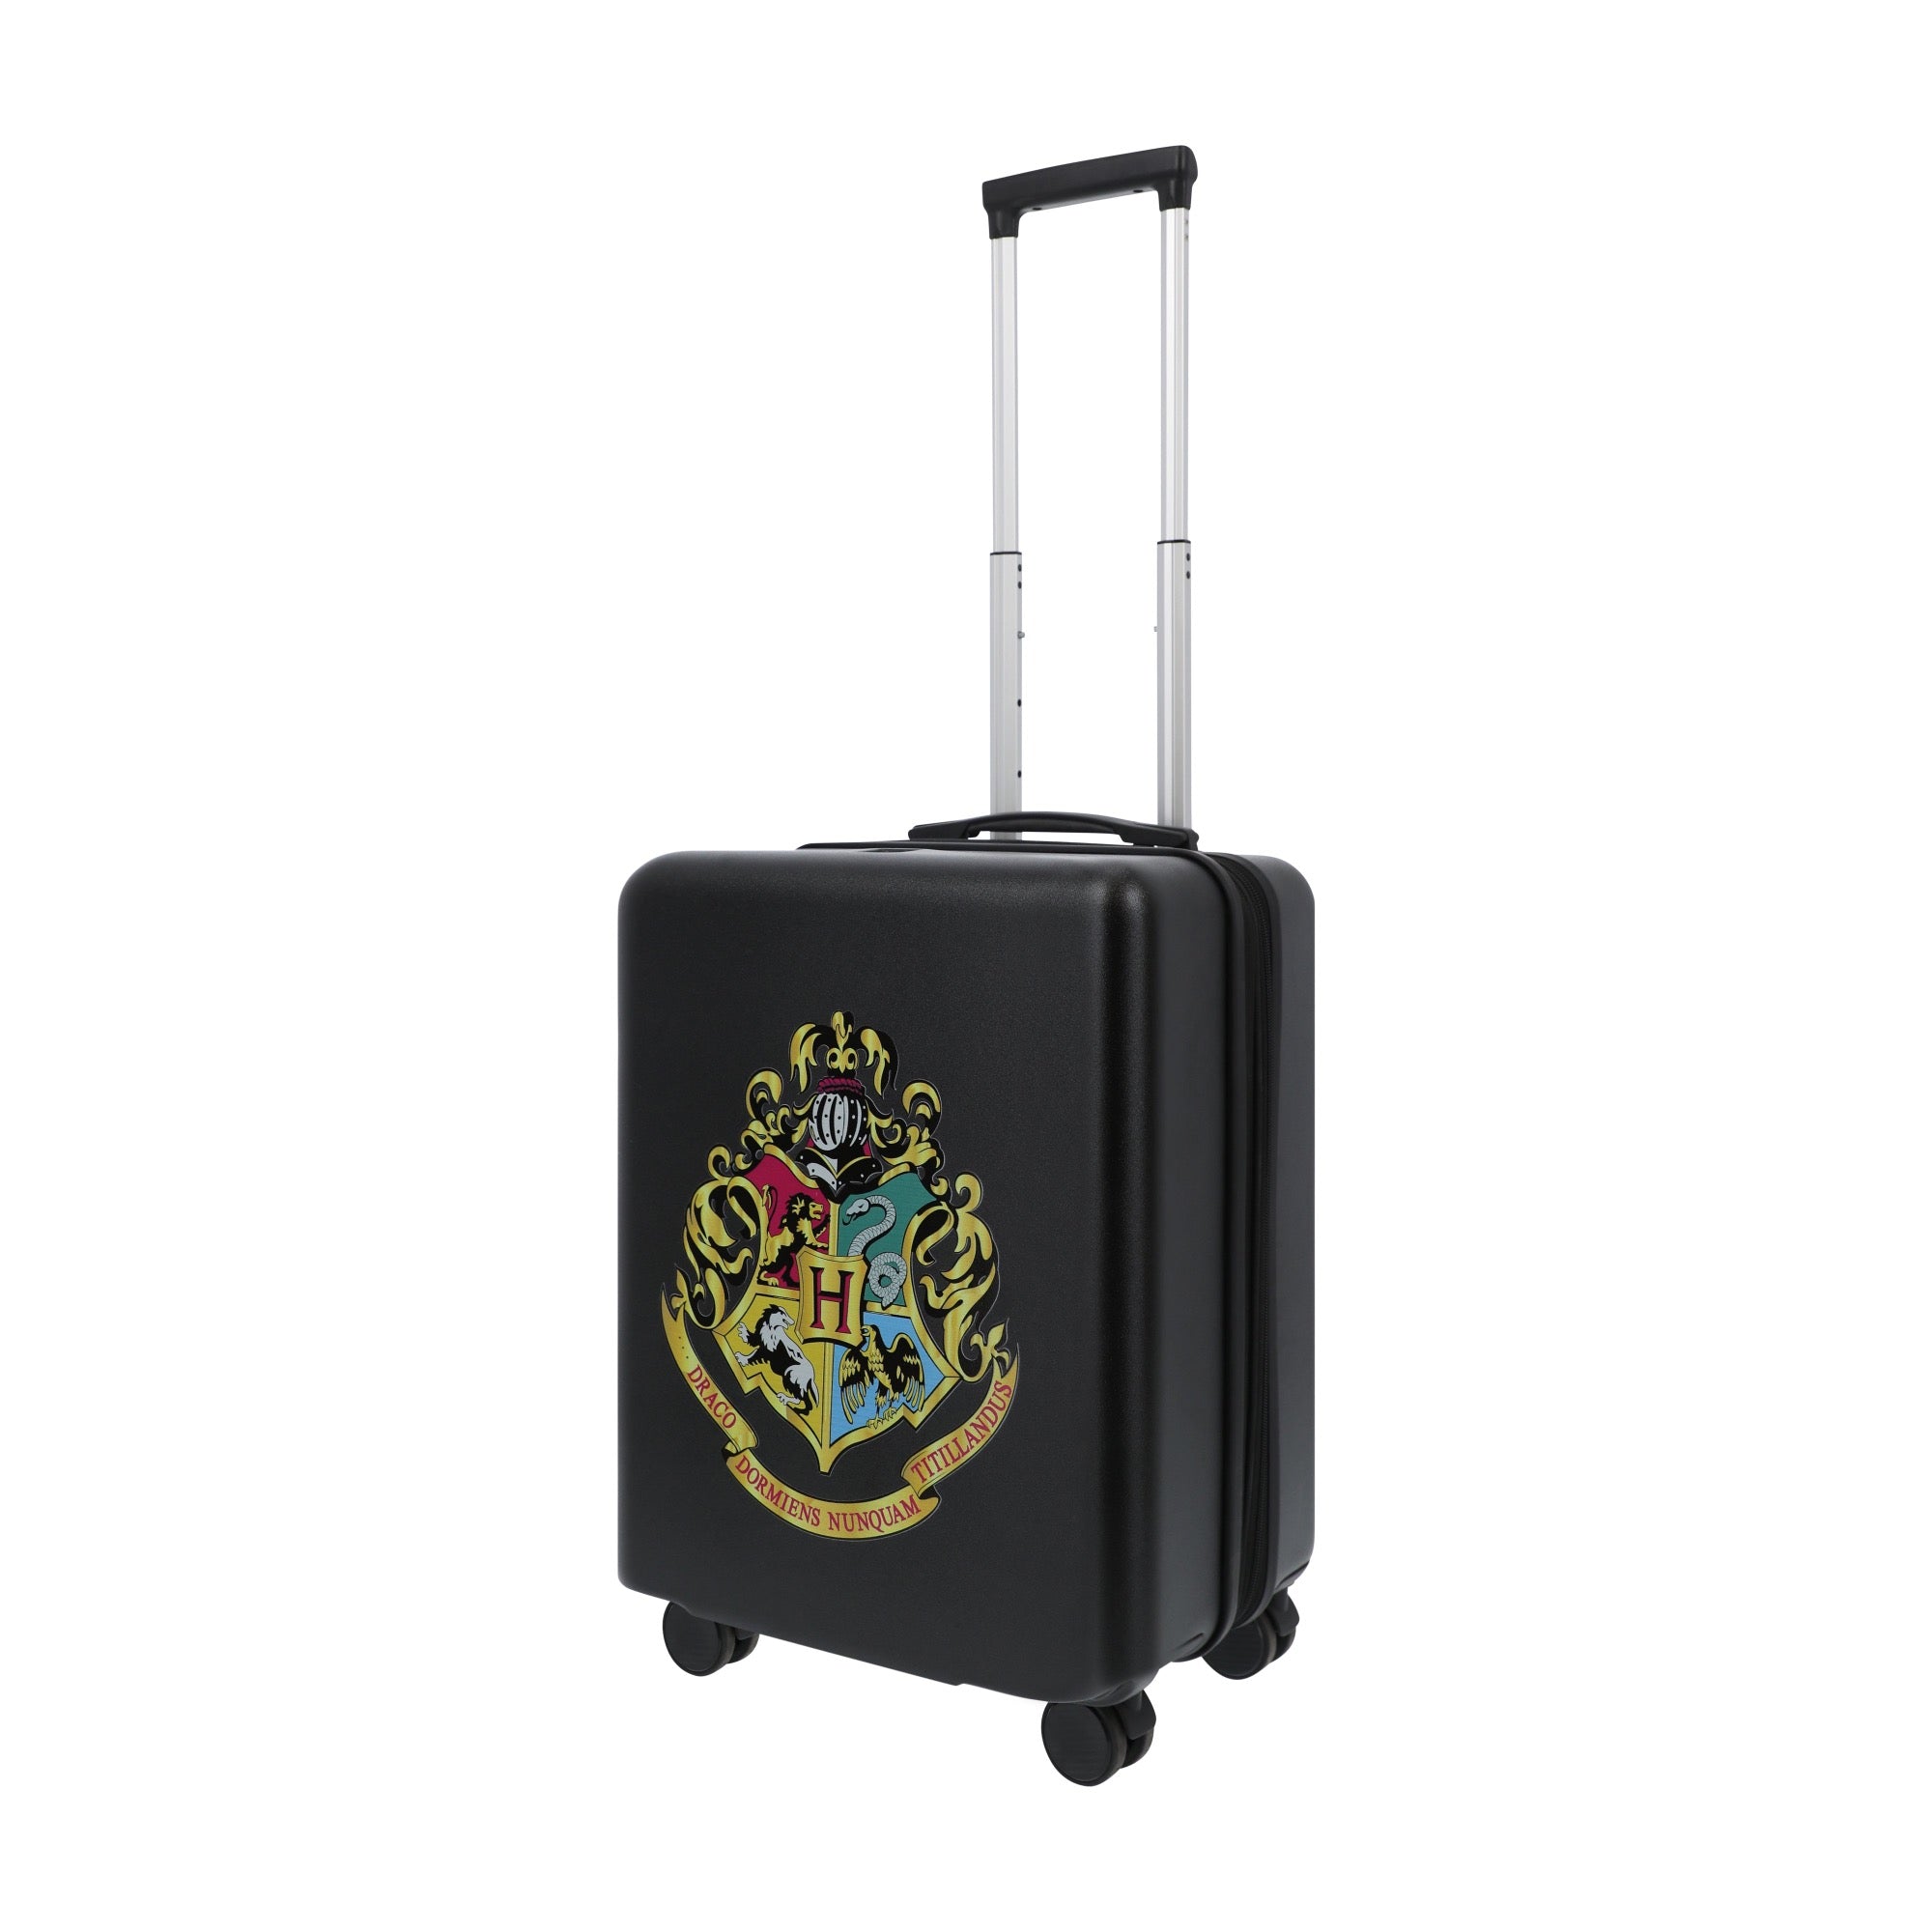 Black WB harry potter 22.5" carry-on spinner suitcase luggage by Ful